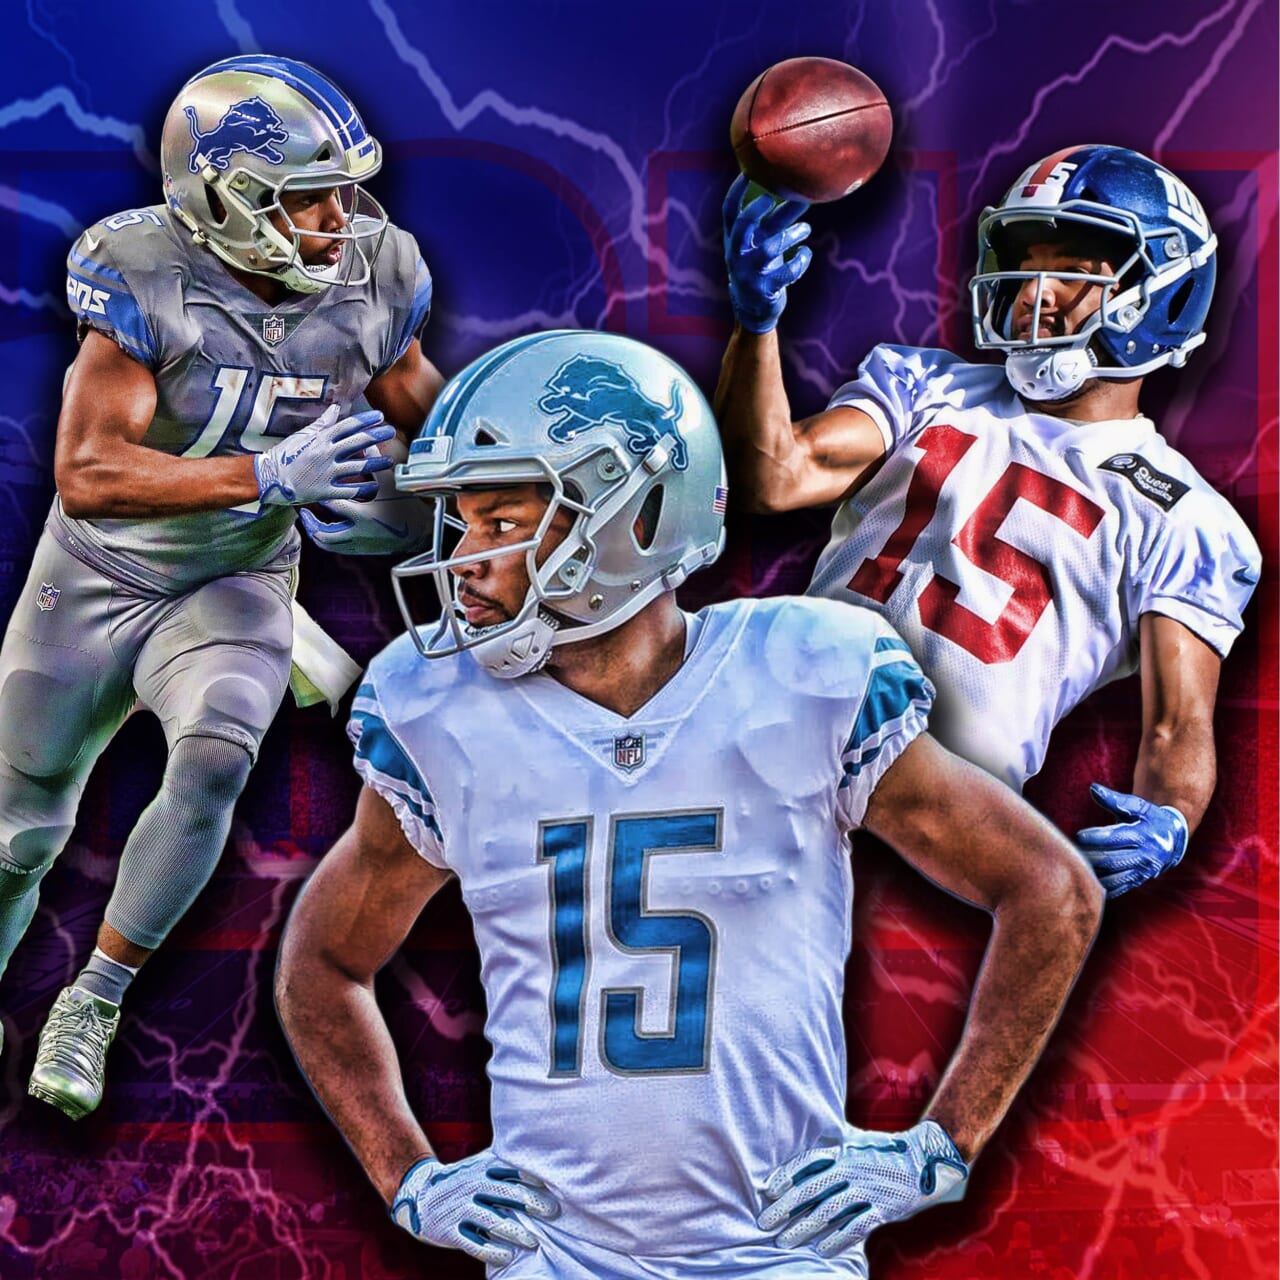 New York Giants: Golden Tate is Purely Golden